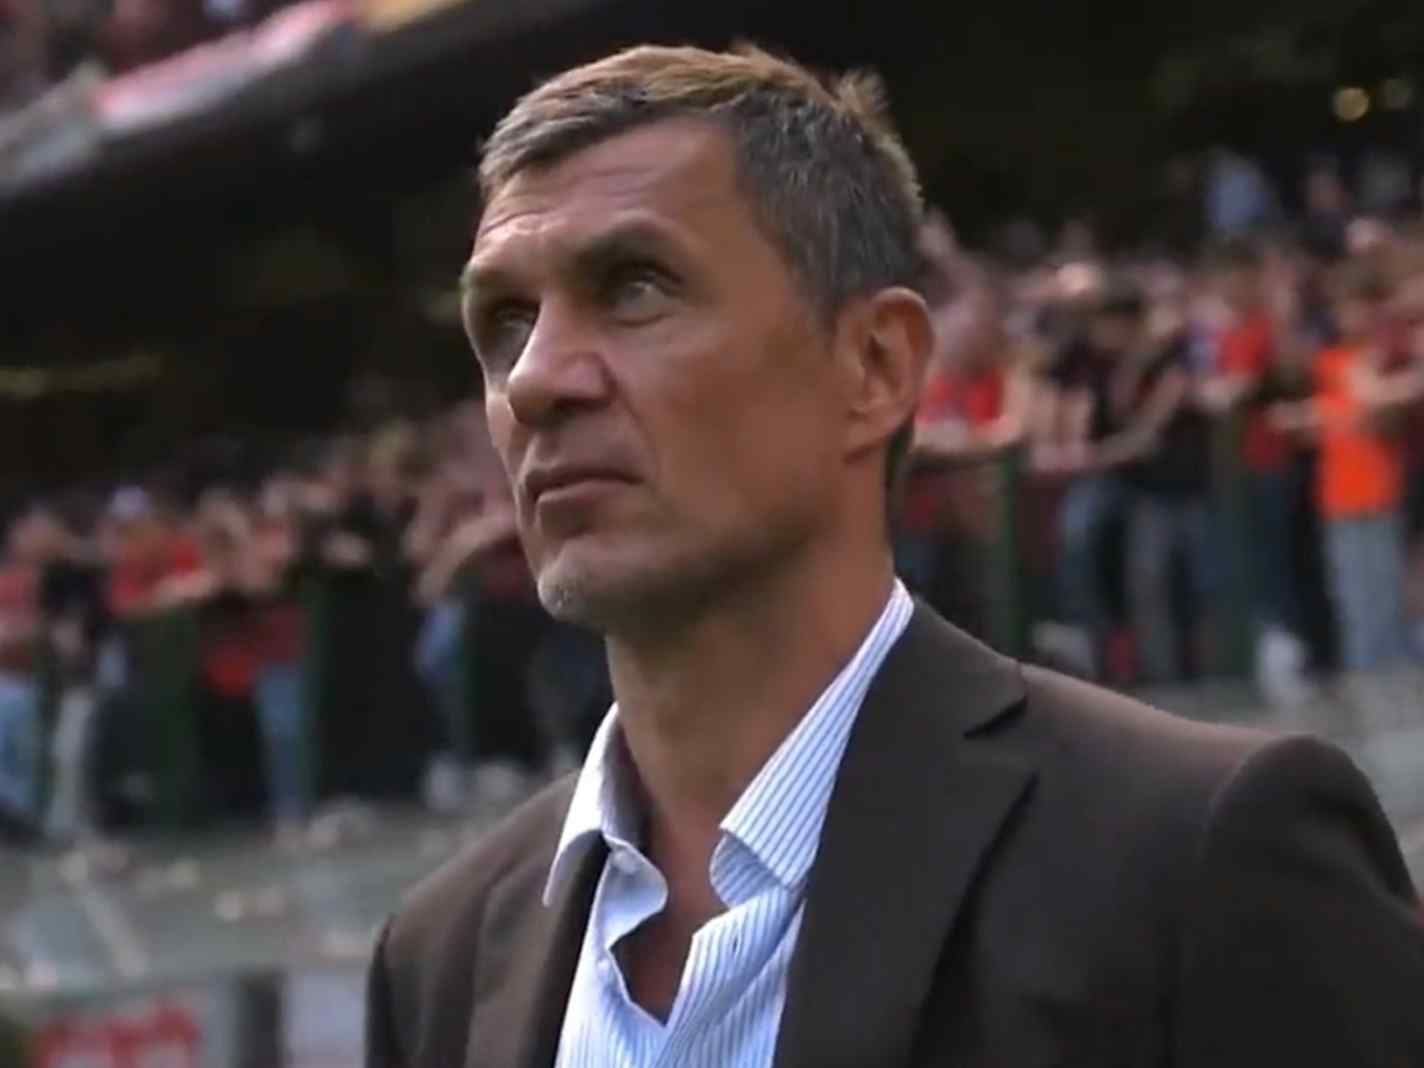 The image shows Paolo Maldini in the sidelines during AC Milan's Serie A fixture against Fiorentina